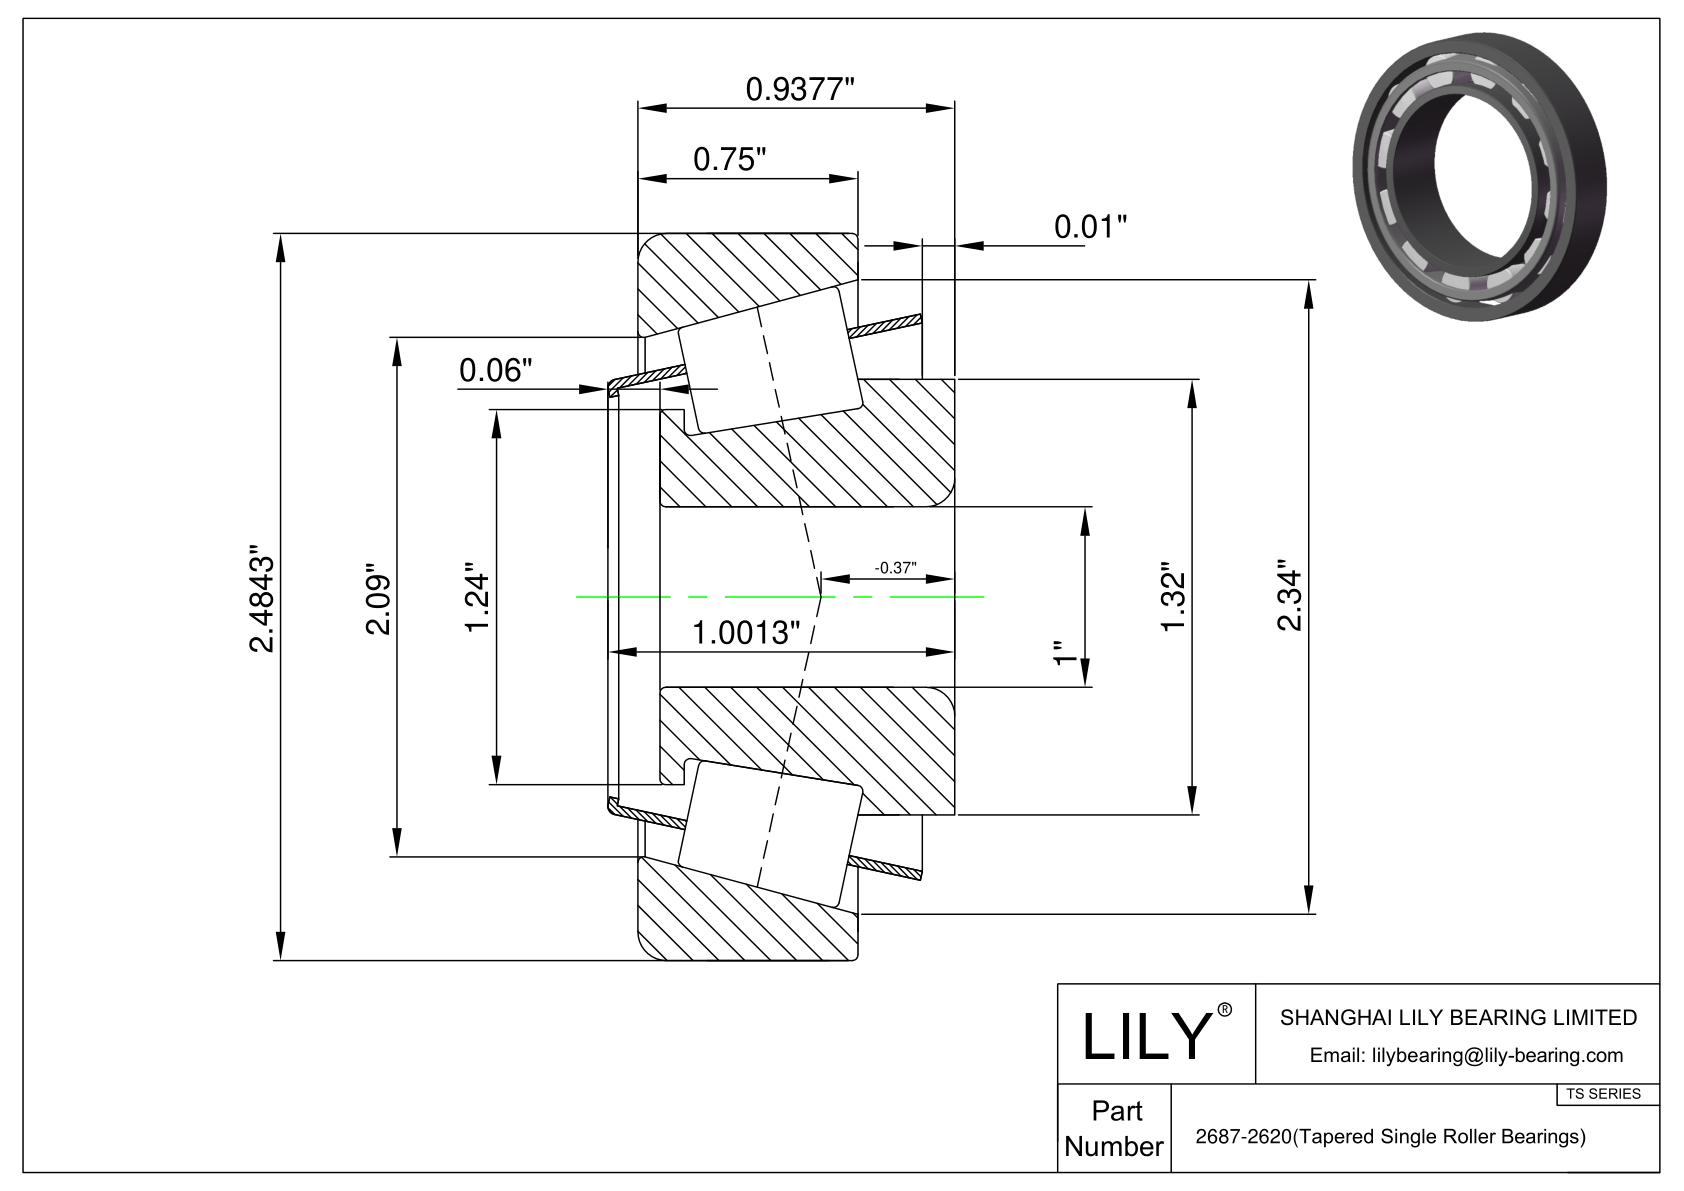 2687-2620 TS (Tapered Single Roller Bearings) (Imperial) cad drawing